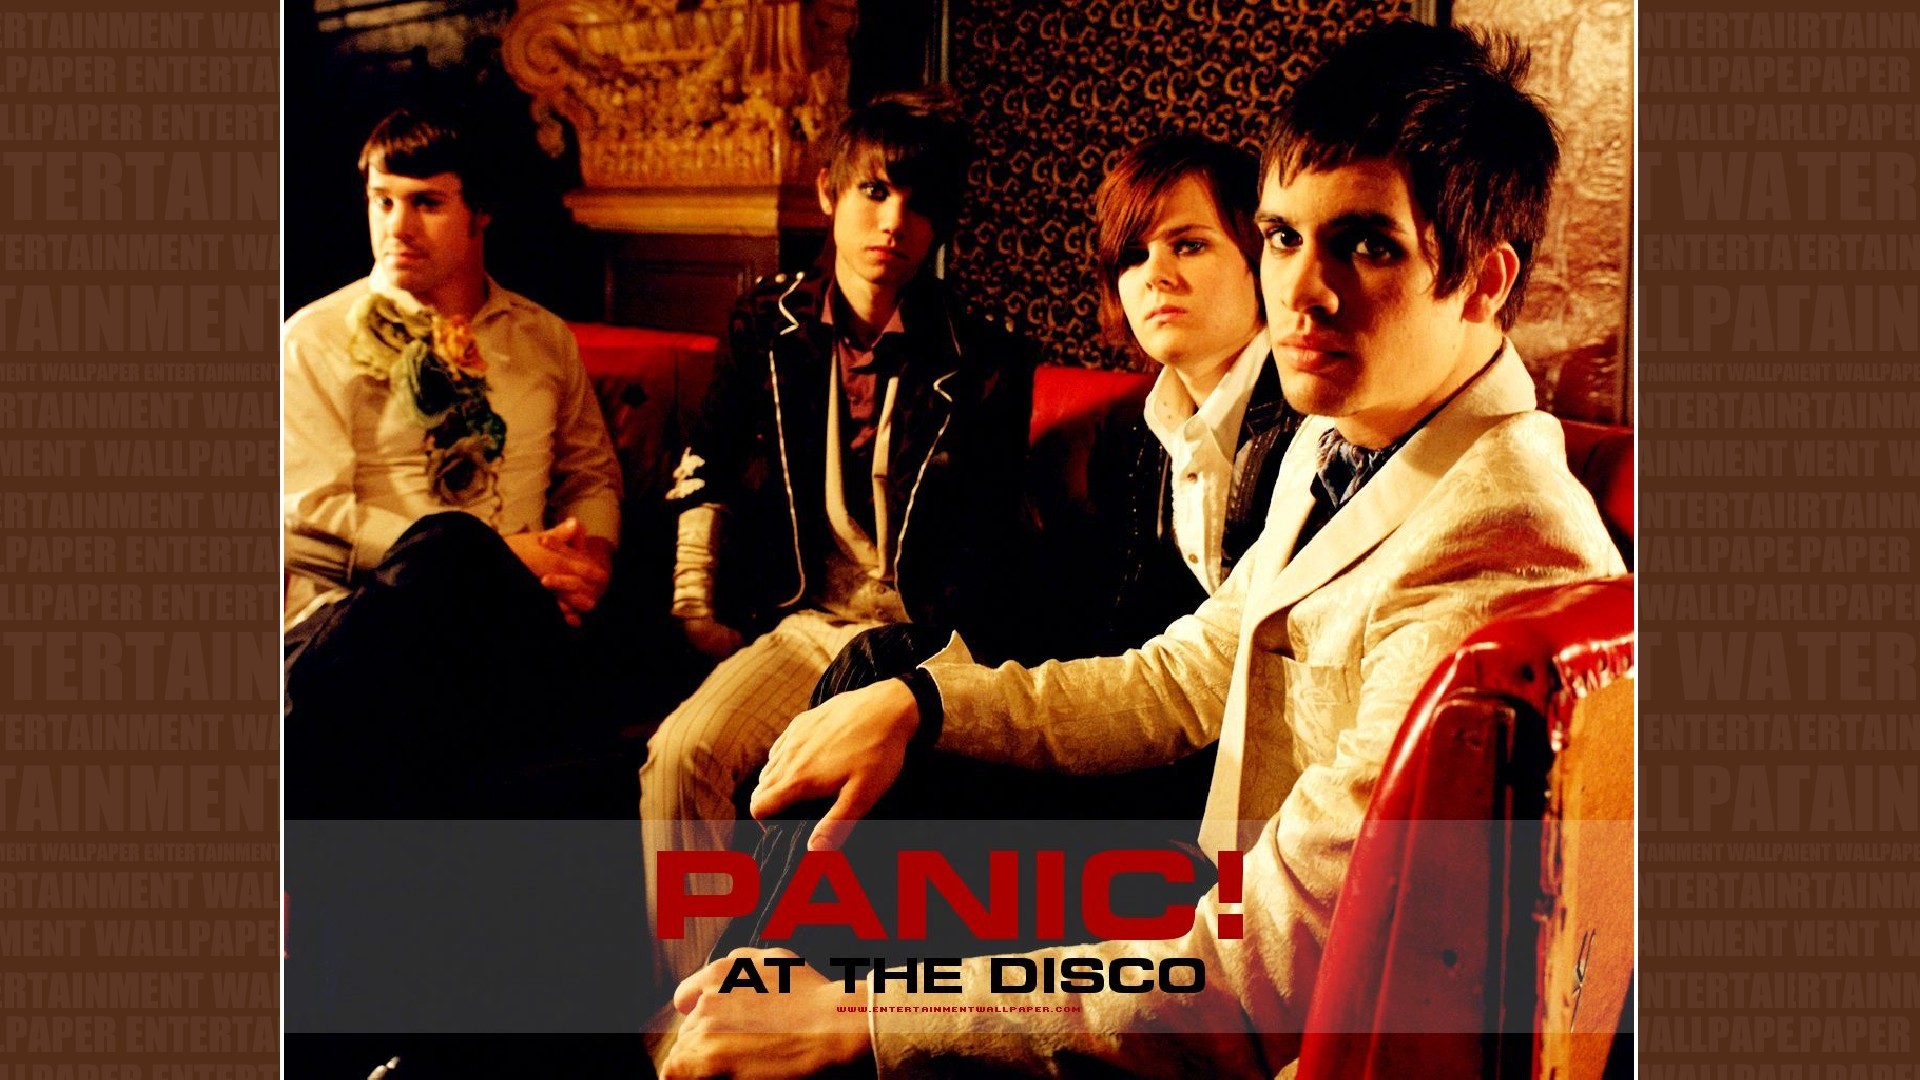 Panic At the Disco Wallpaper – Original size, download now